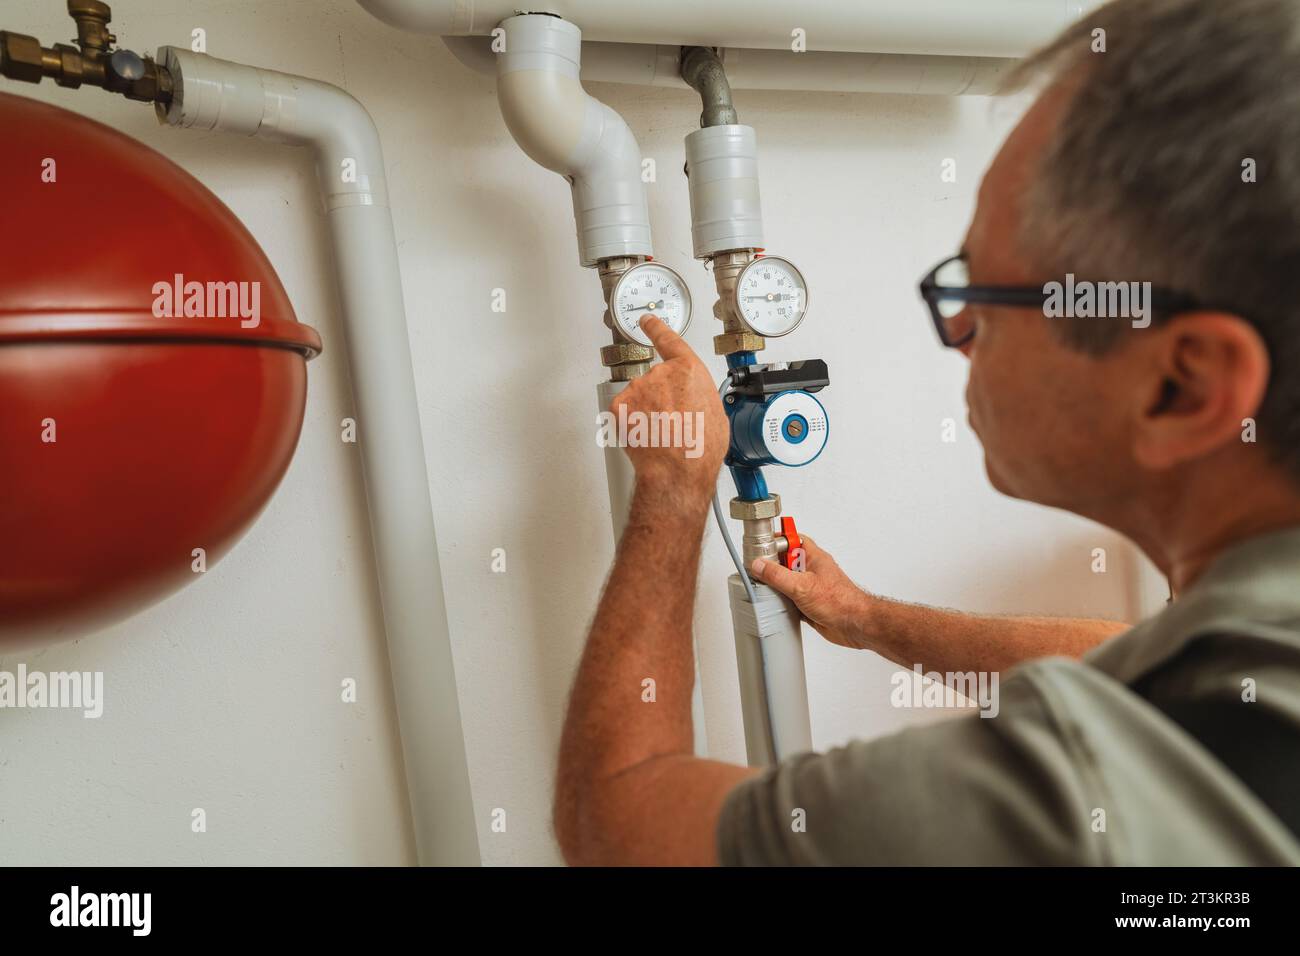 Heating engineer checks gas thermostat at a boiler room with a old gas heating system. Gas heater replacement obligation concept image Stock Photo